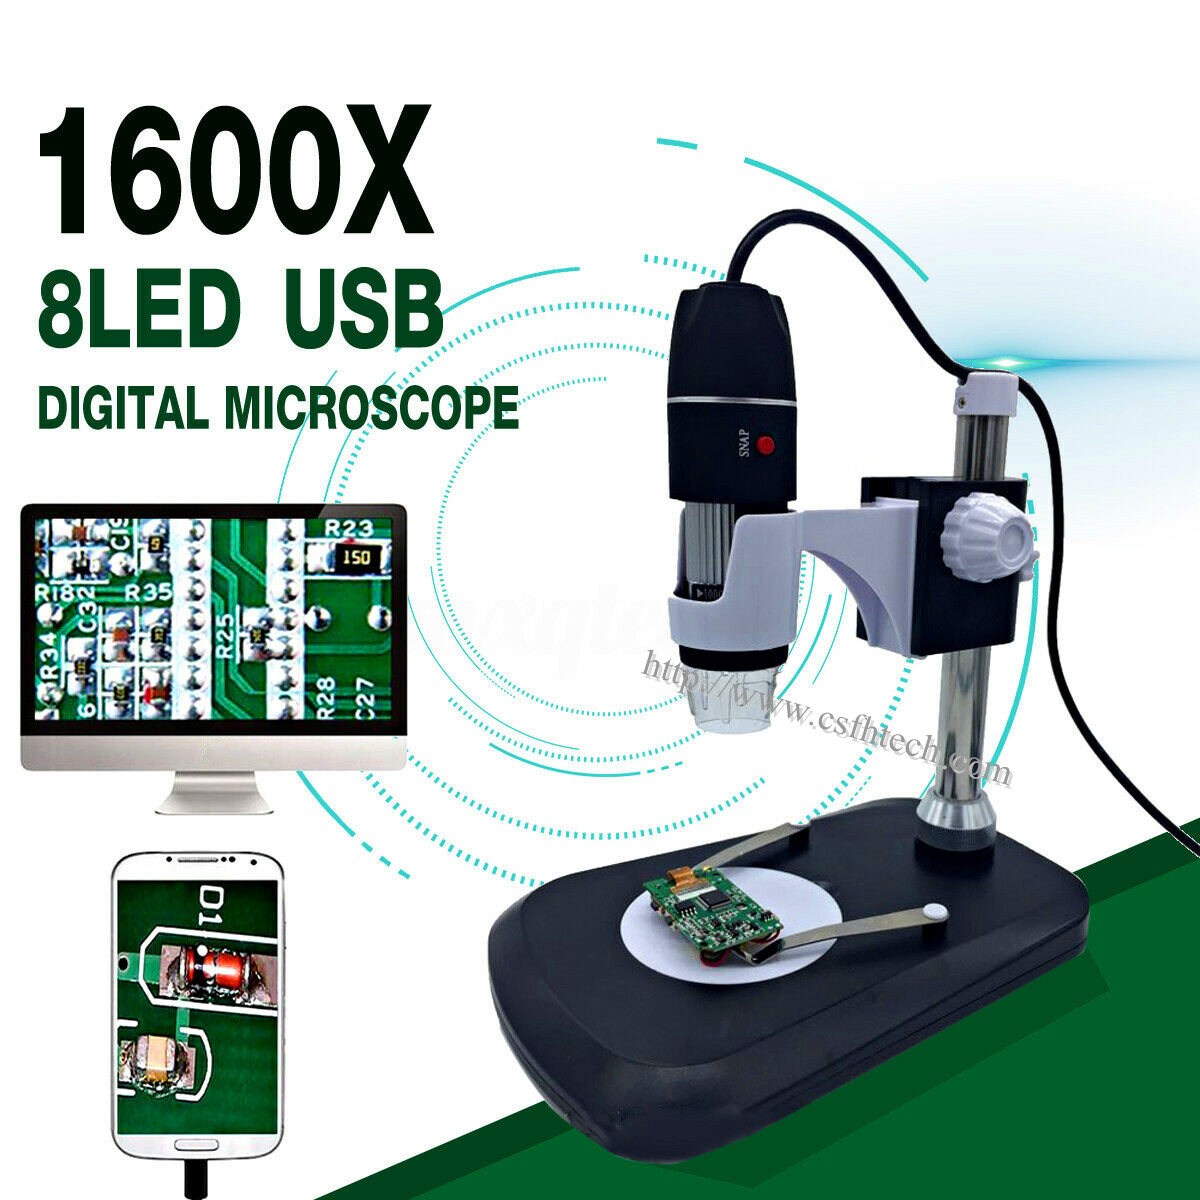 2020 The Best Quality1600X 8 LED Zoom USB Digital Microscope Magnifier Endoscope Camera +Video Made In China Factory 